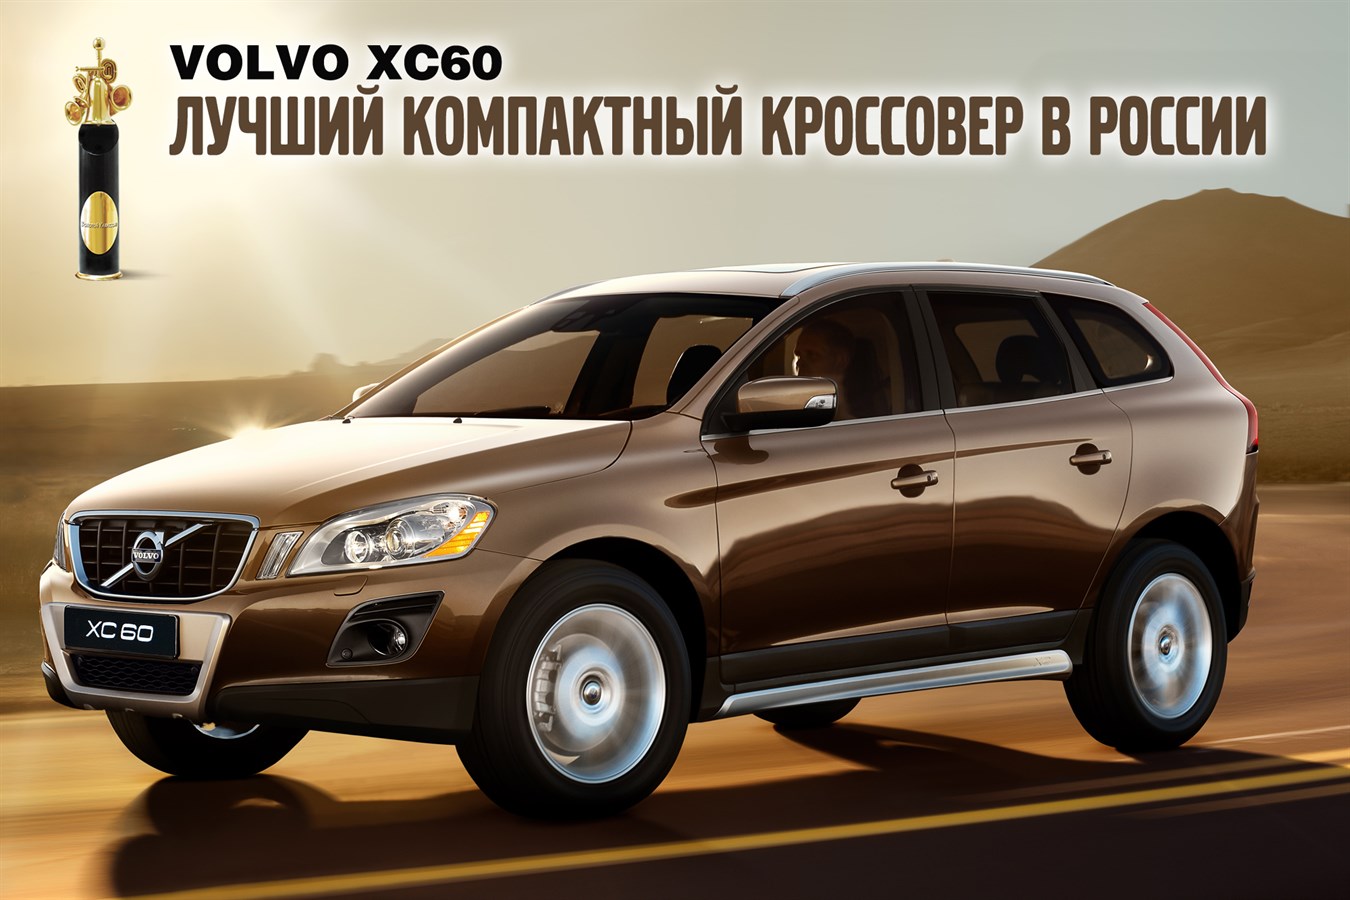 Volvo XC60 was awarded the Golden Klaxon in Russia